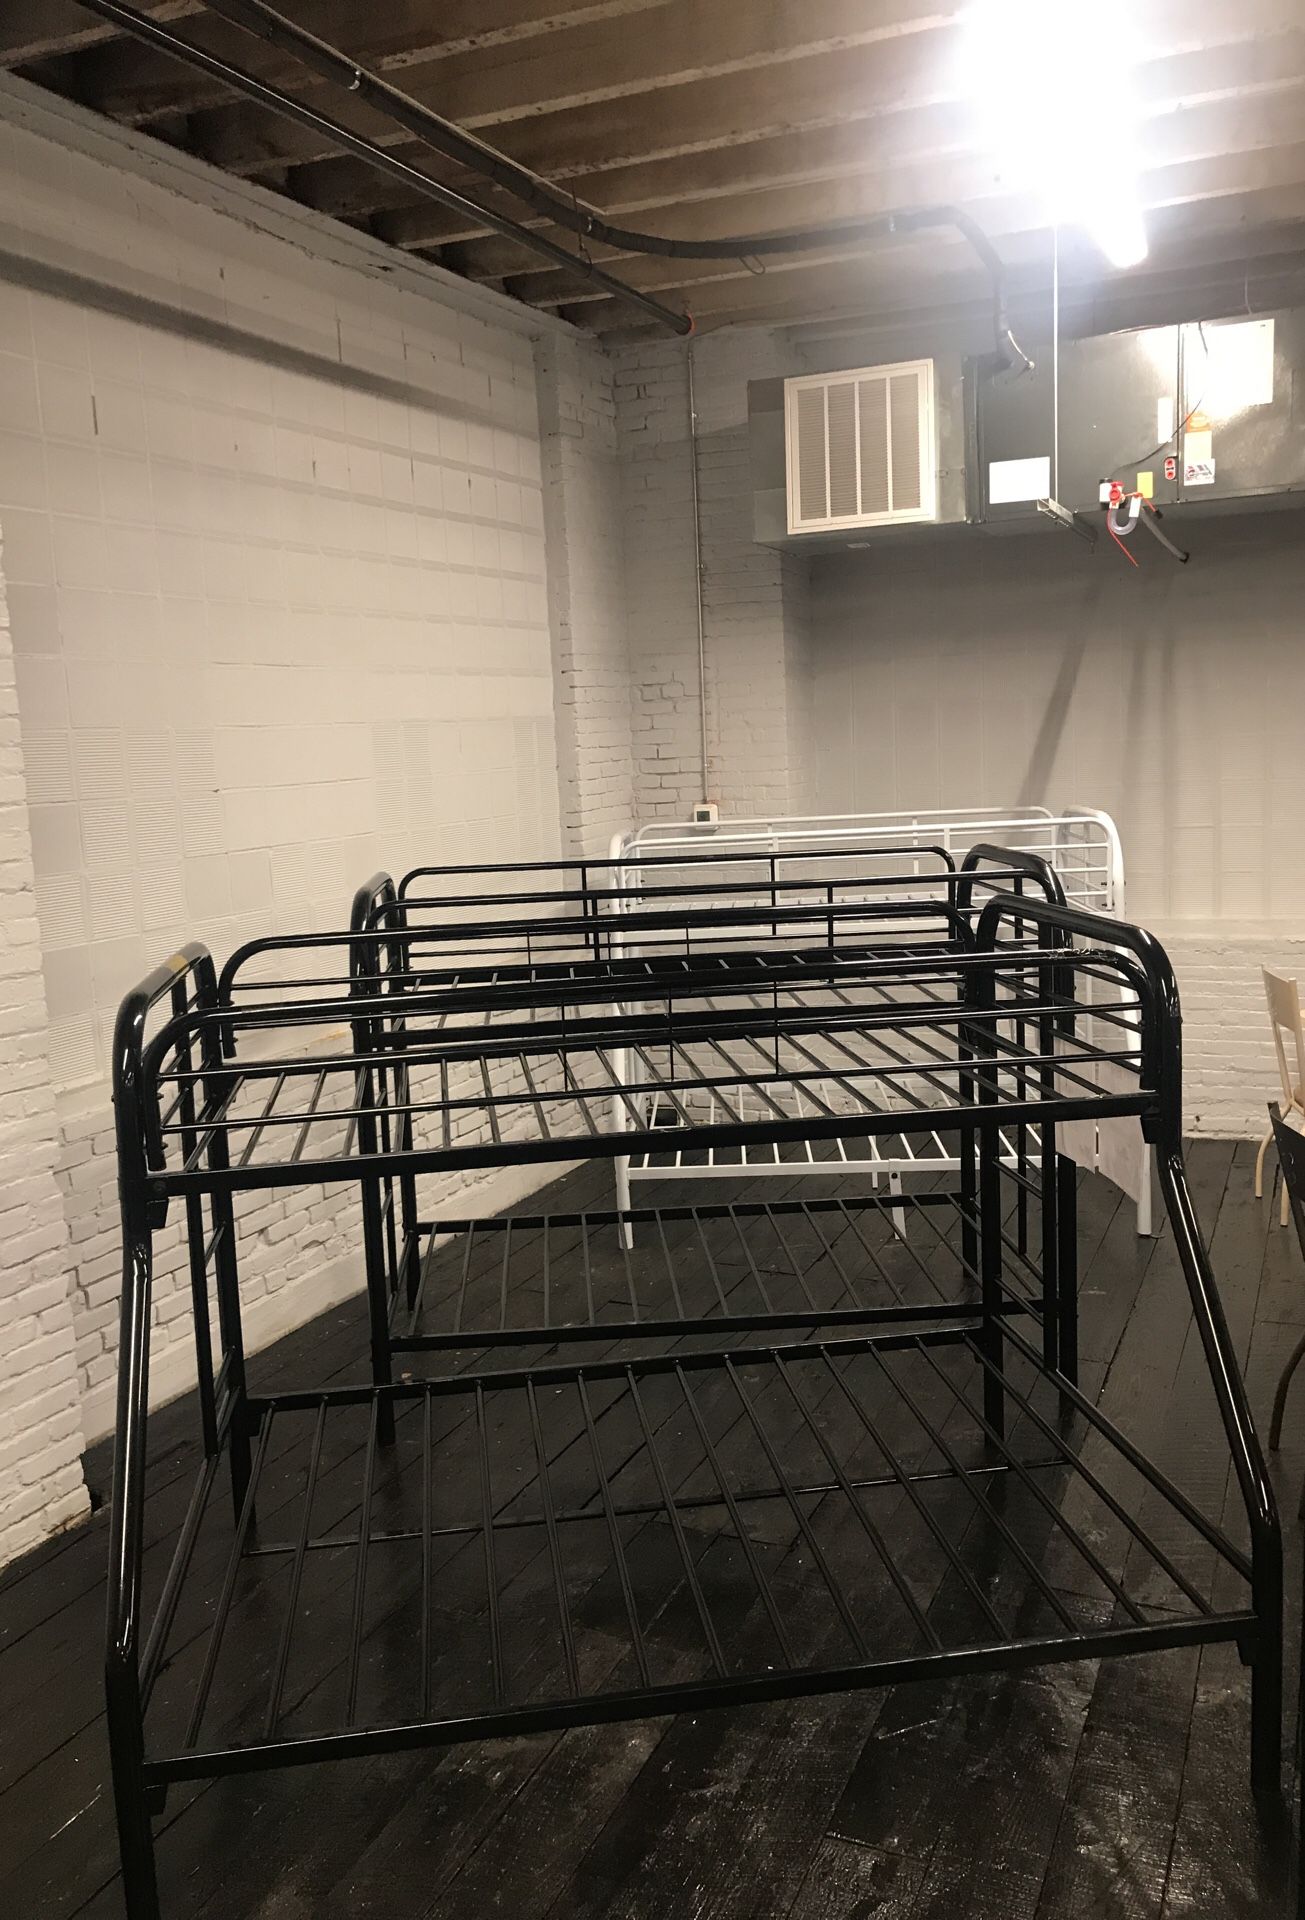 BUNK BED SALES !!!! Holliday season don’t miss this !! Free drop off and we assemble!!!